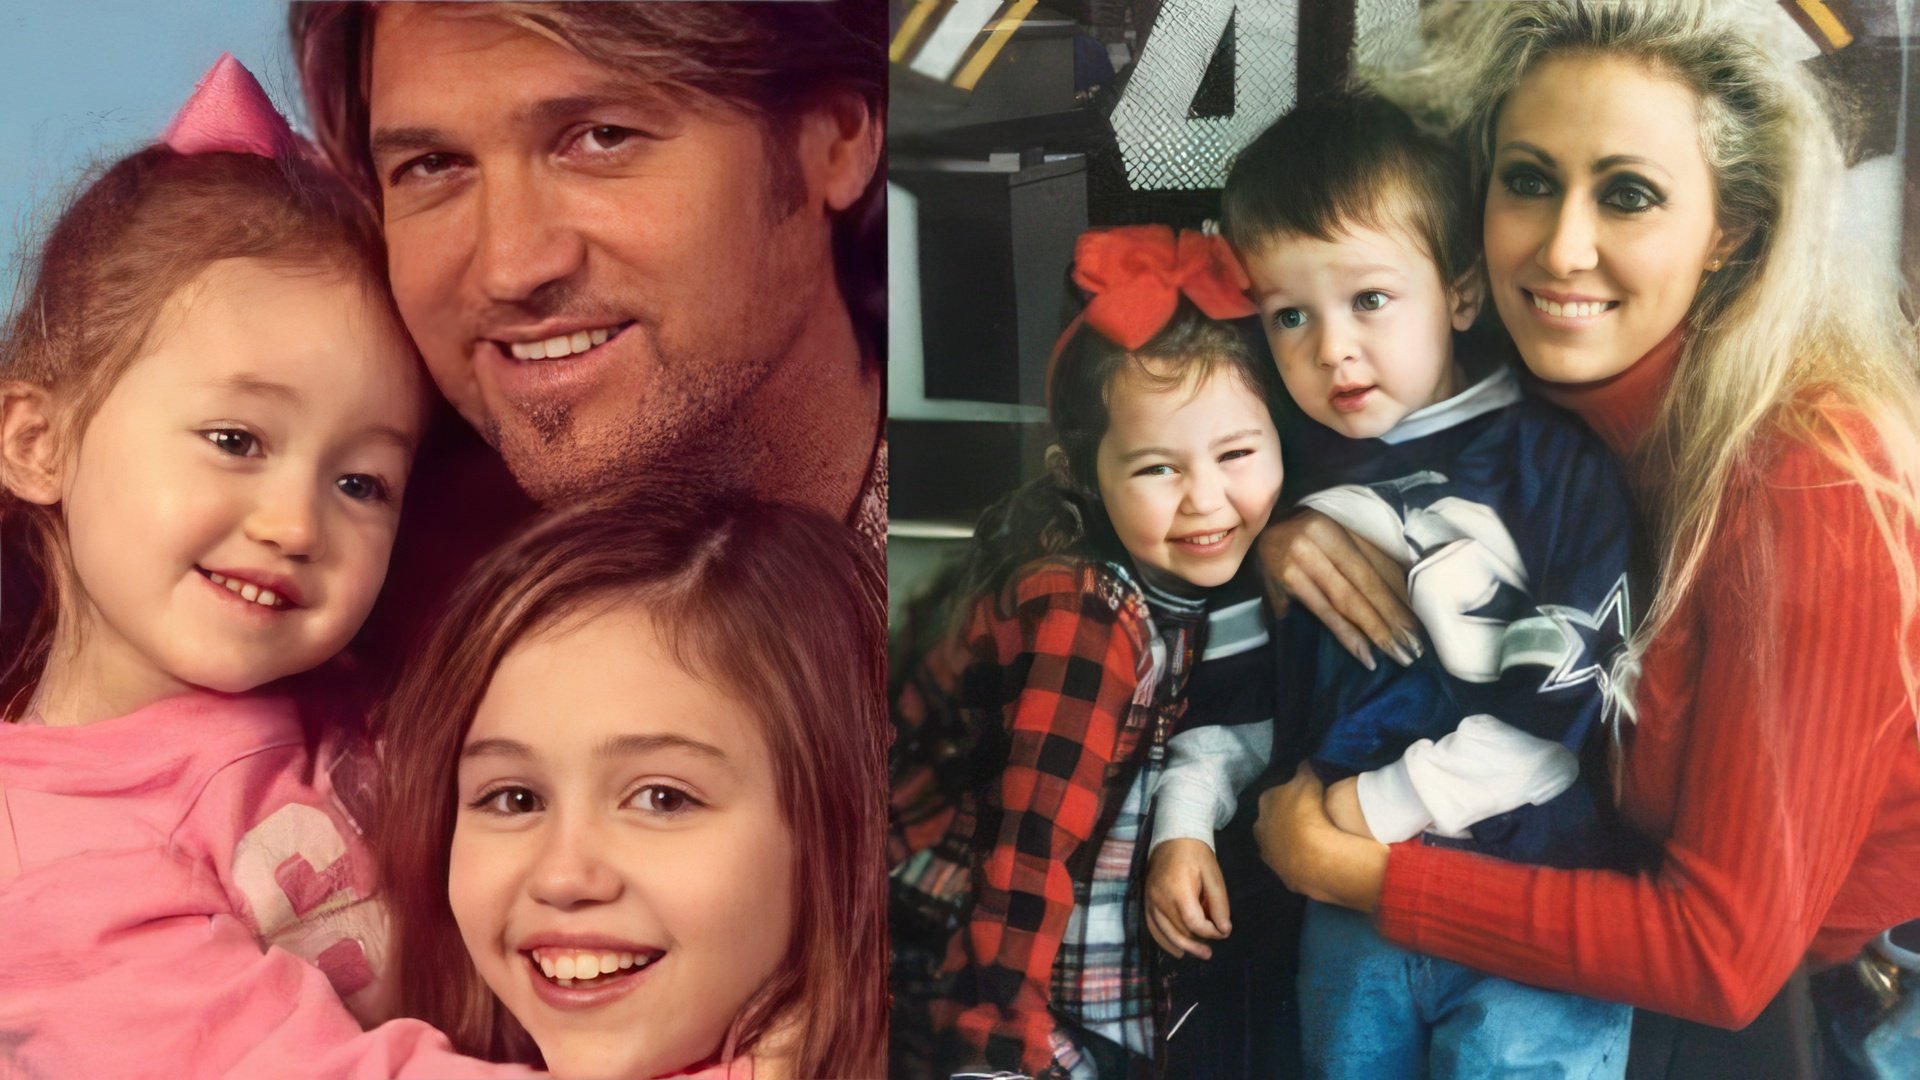 Little Miley Cyrus with her parents, sister, and brother